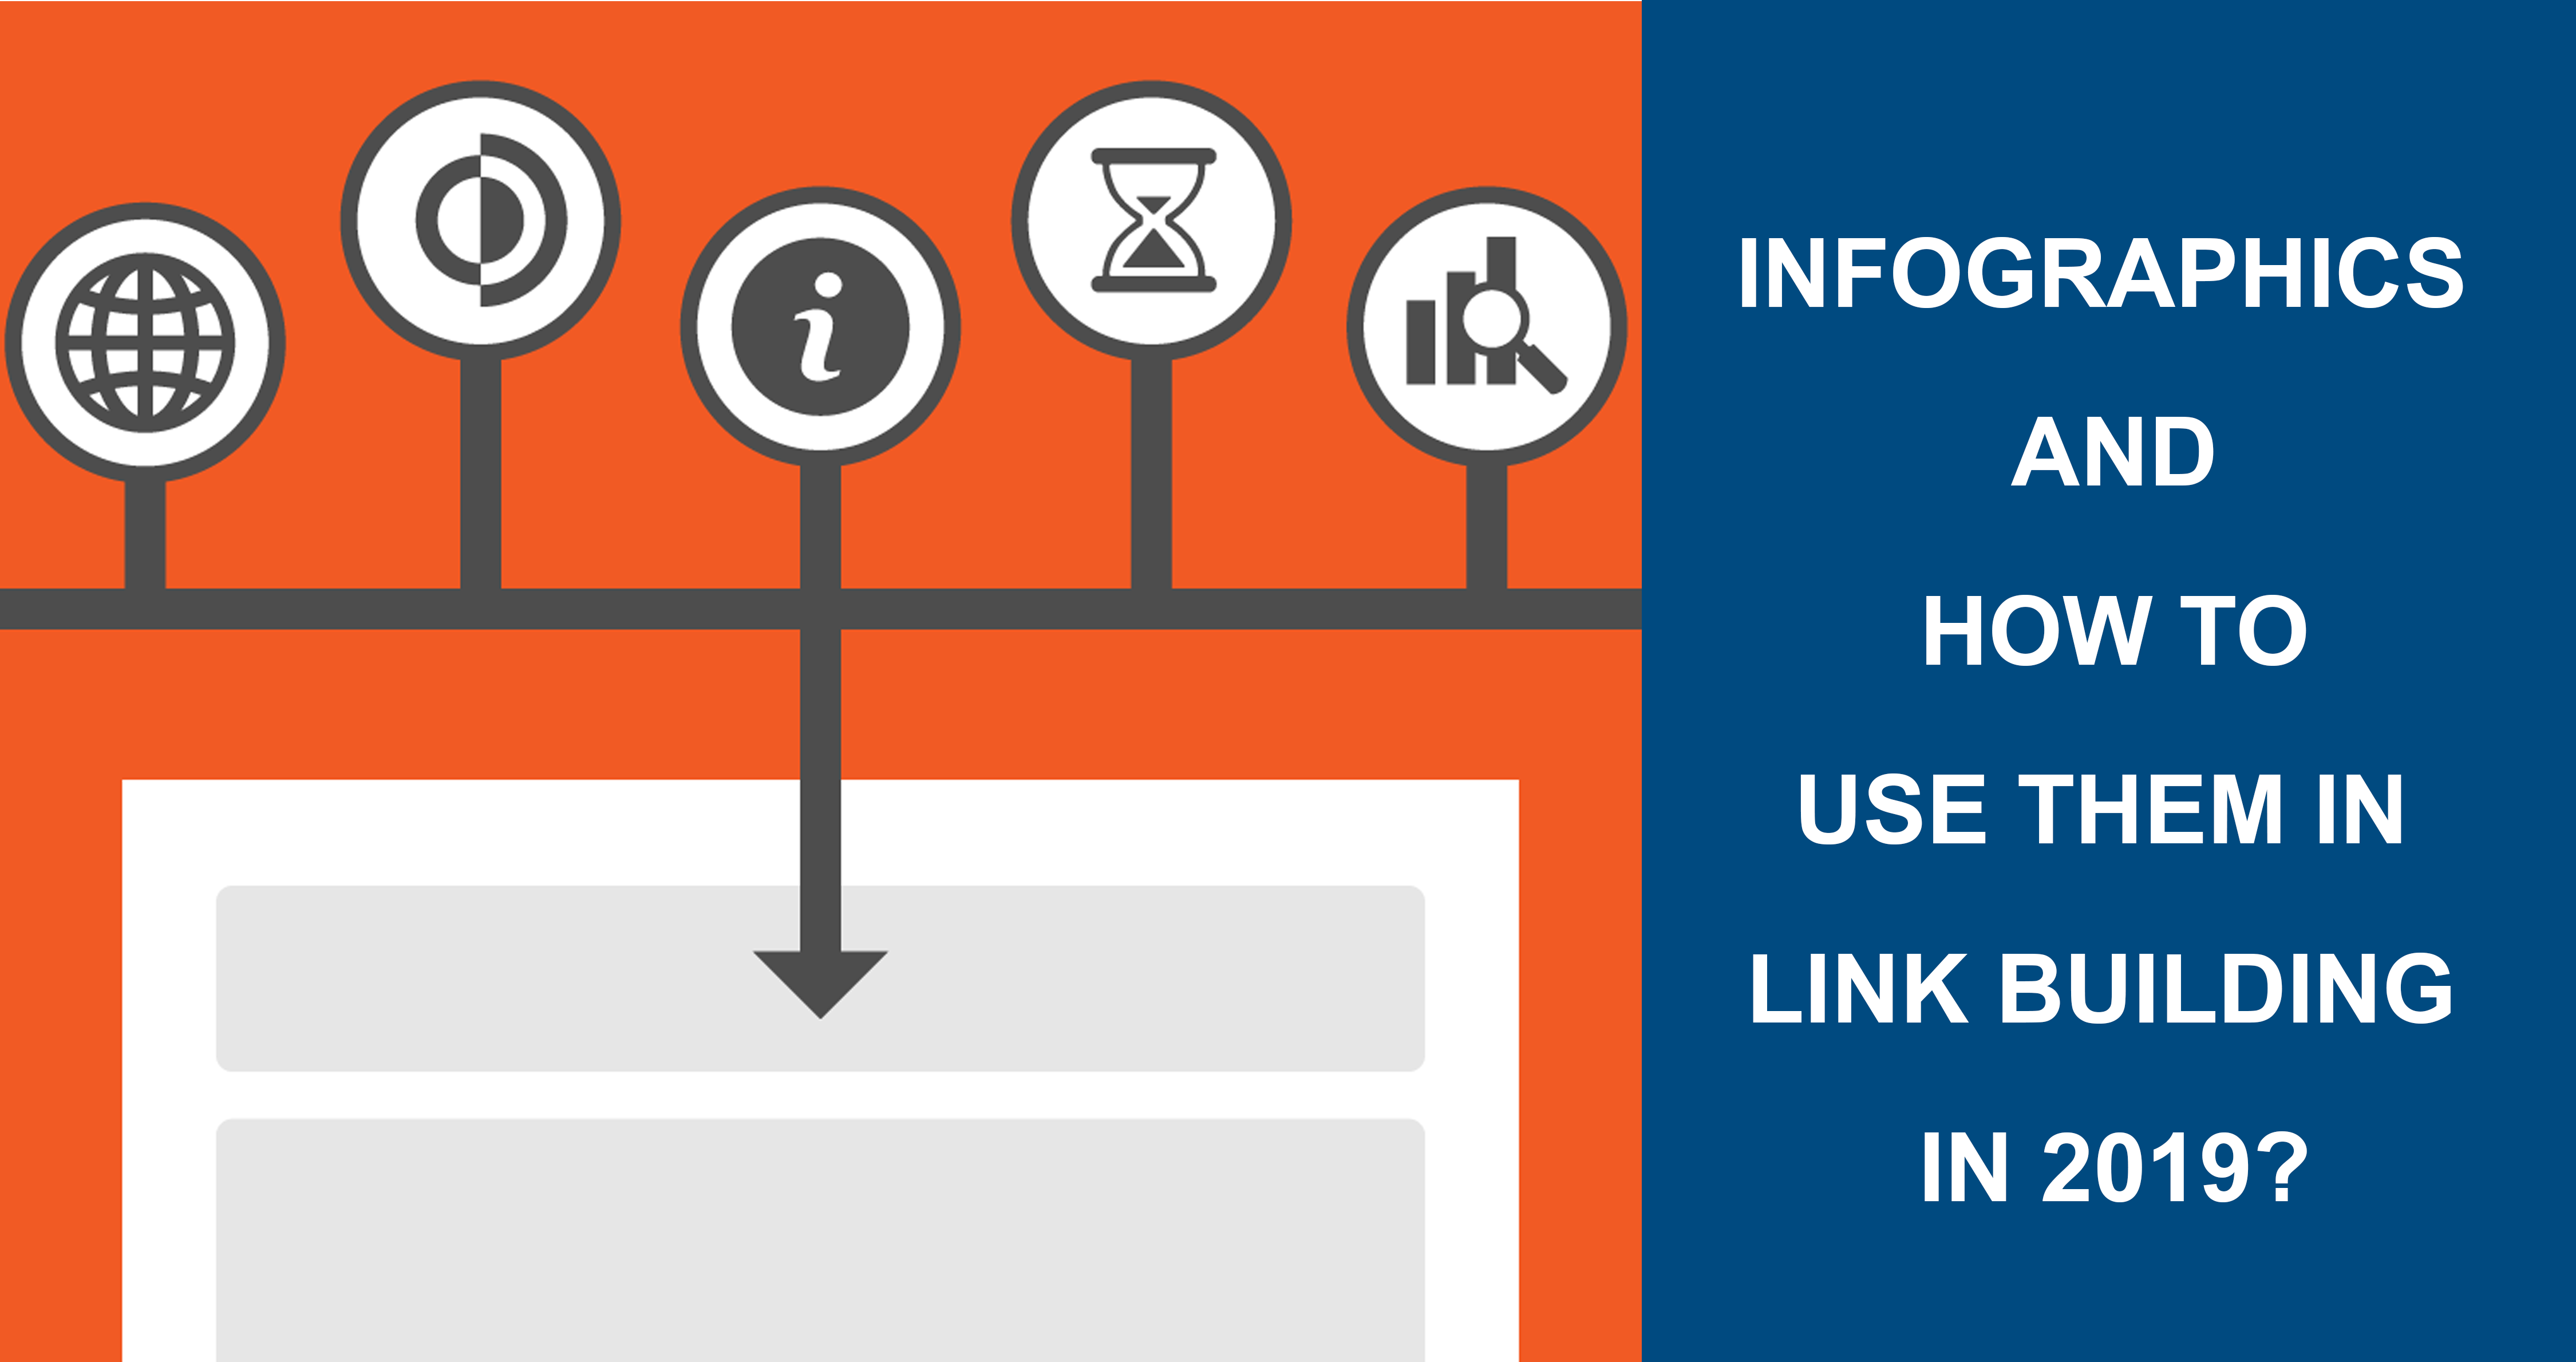 Infographics and How to Use Them in Link Building in 2019